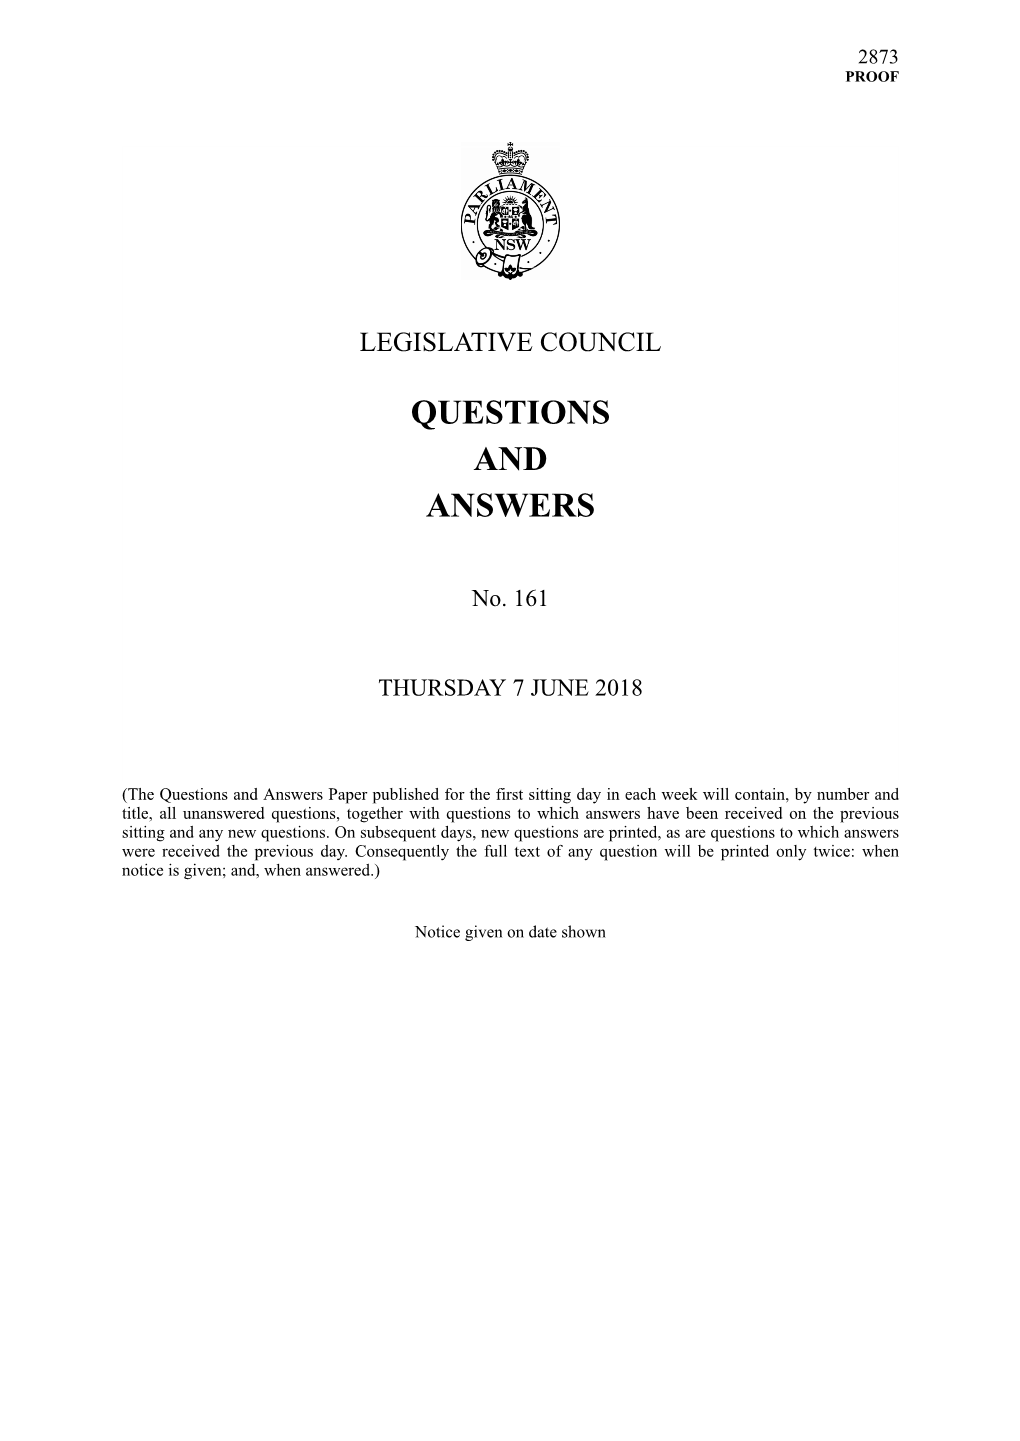 Questions & Answers Paper No